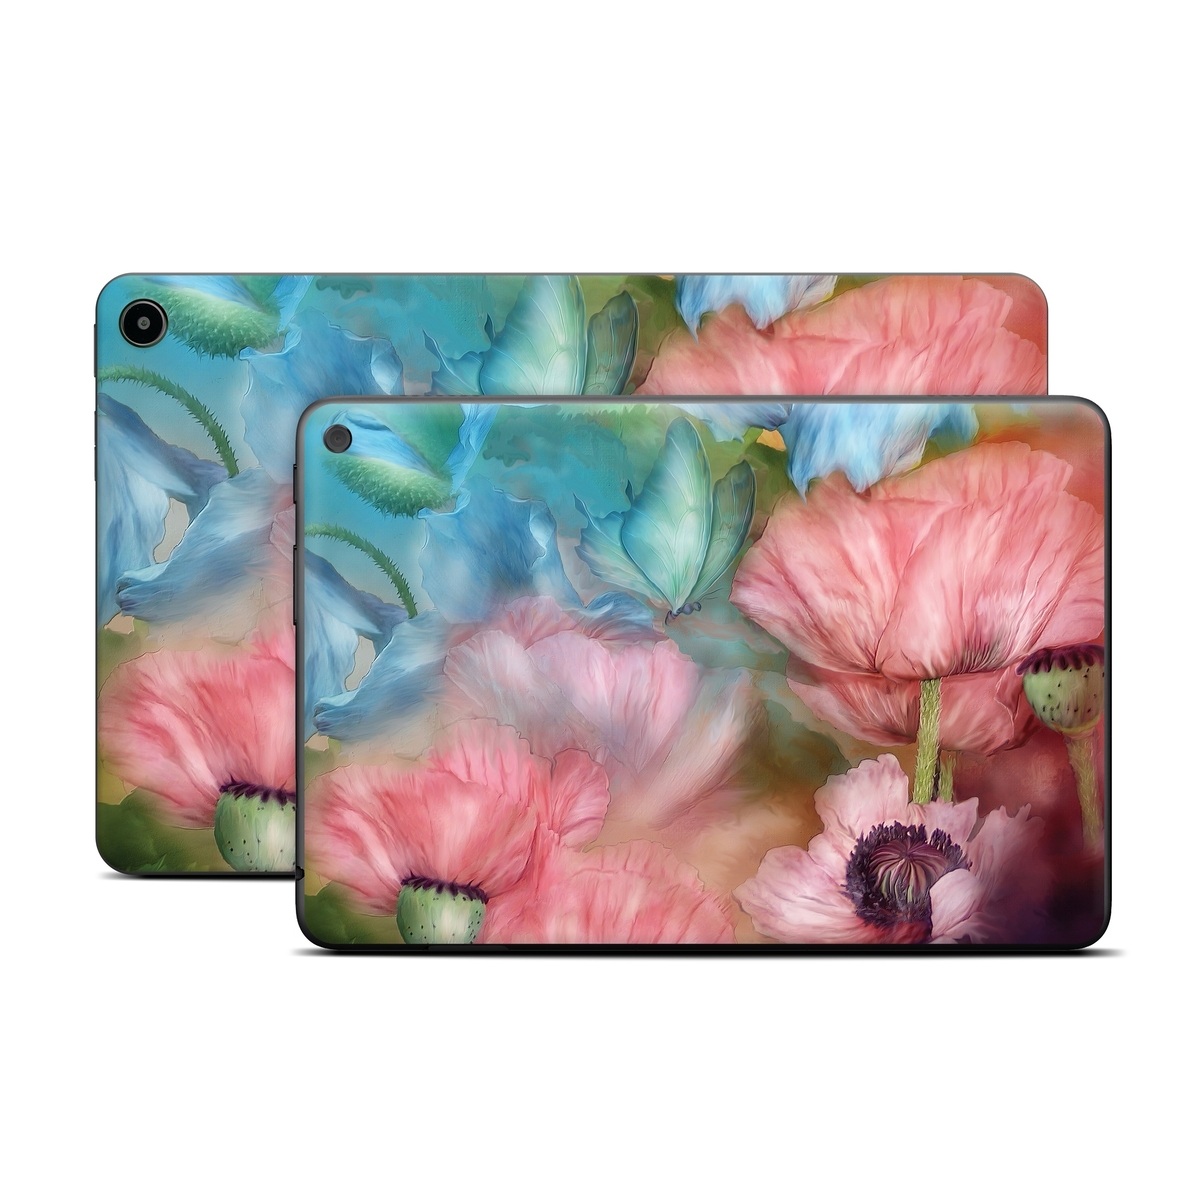 Amazon Fire Tablet Series Skin Skin design of Flower, Petal, Watercolor paint, Painting, Plant, Flowering plant, Pink, Botany, Wildflower, Still life, with gray, blue, black, red, green colors